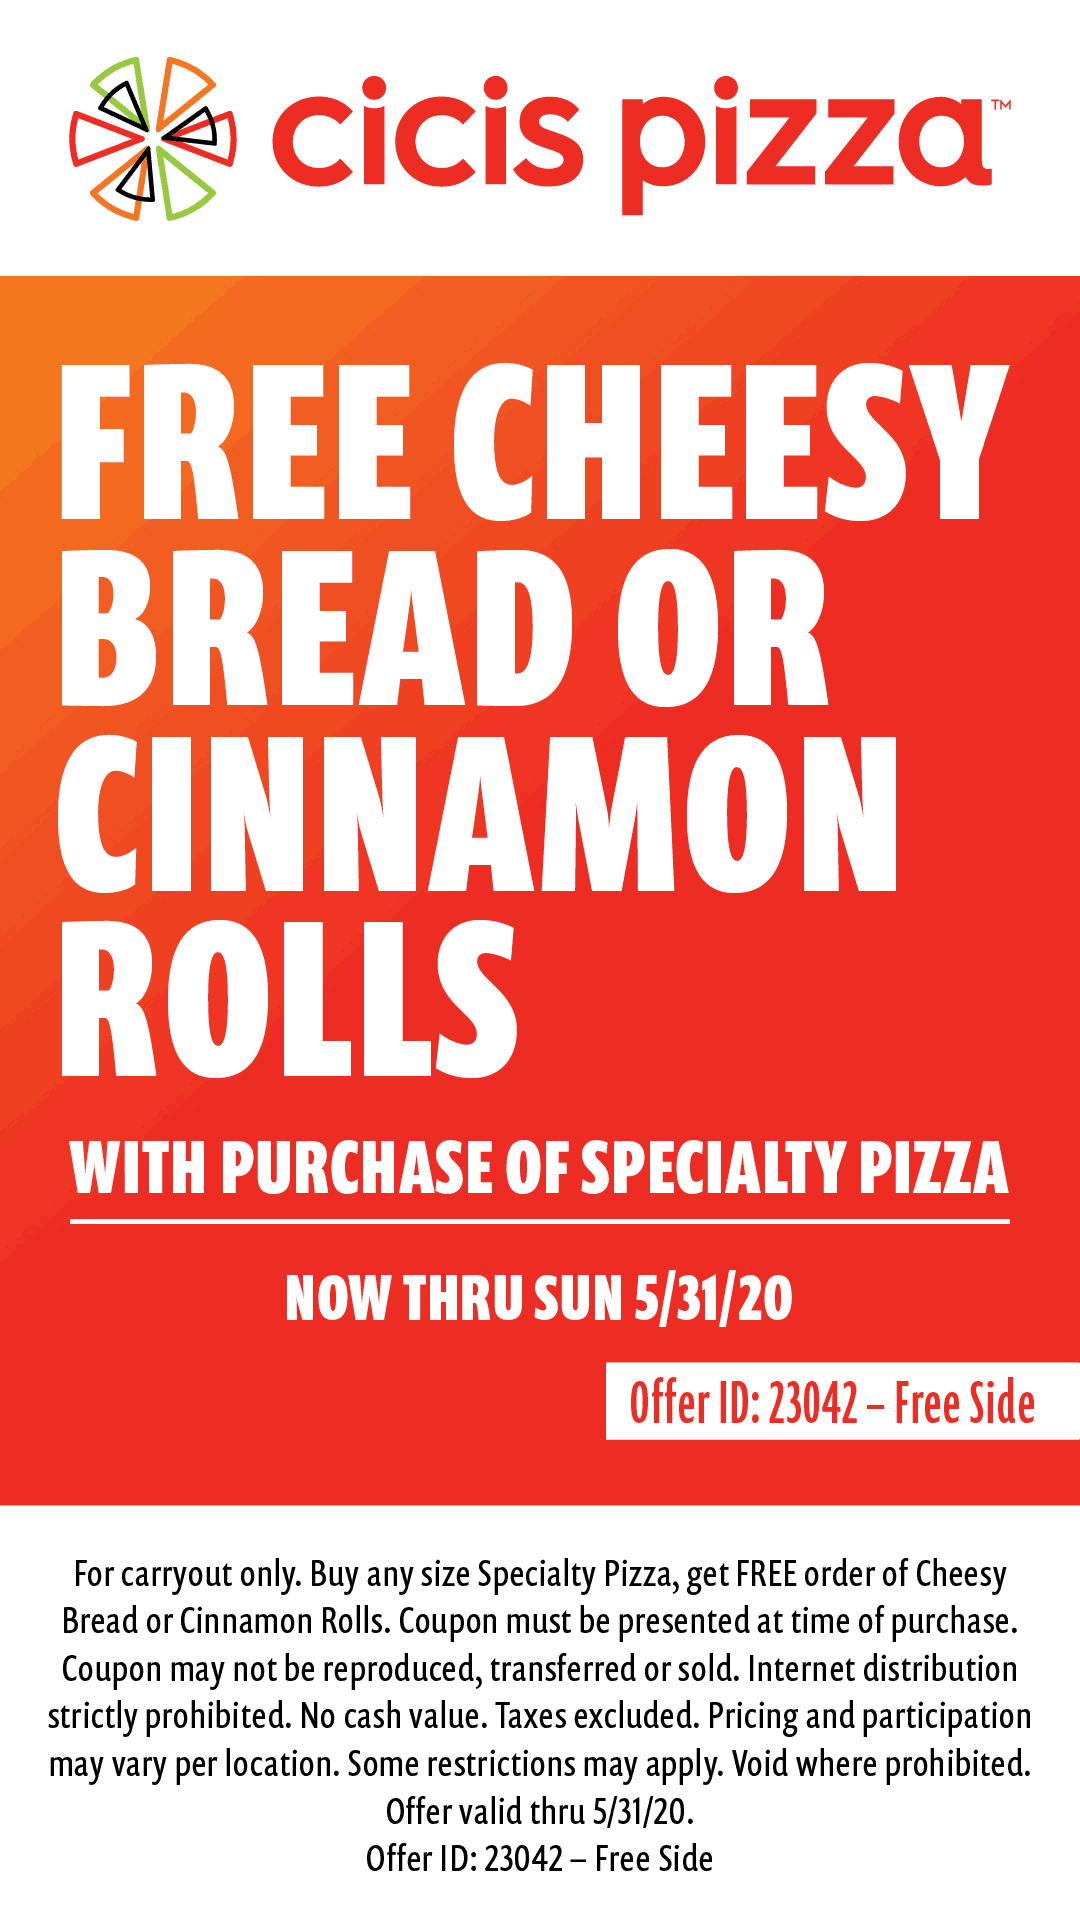 Cicis restaurants Coupon  Free cheesy bread or cinnamon rolls with your pizza at Cicis #cicis